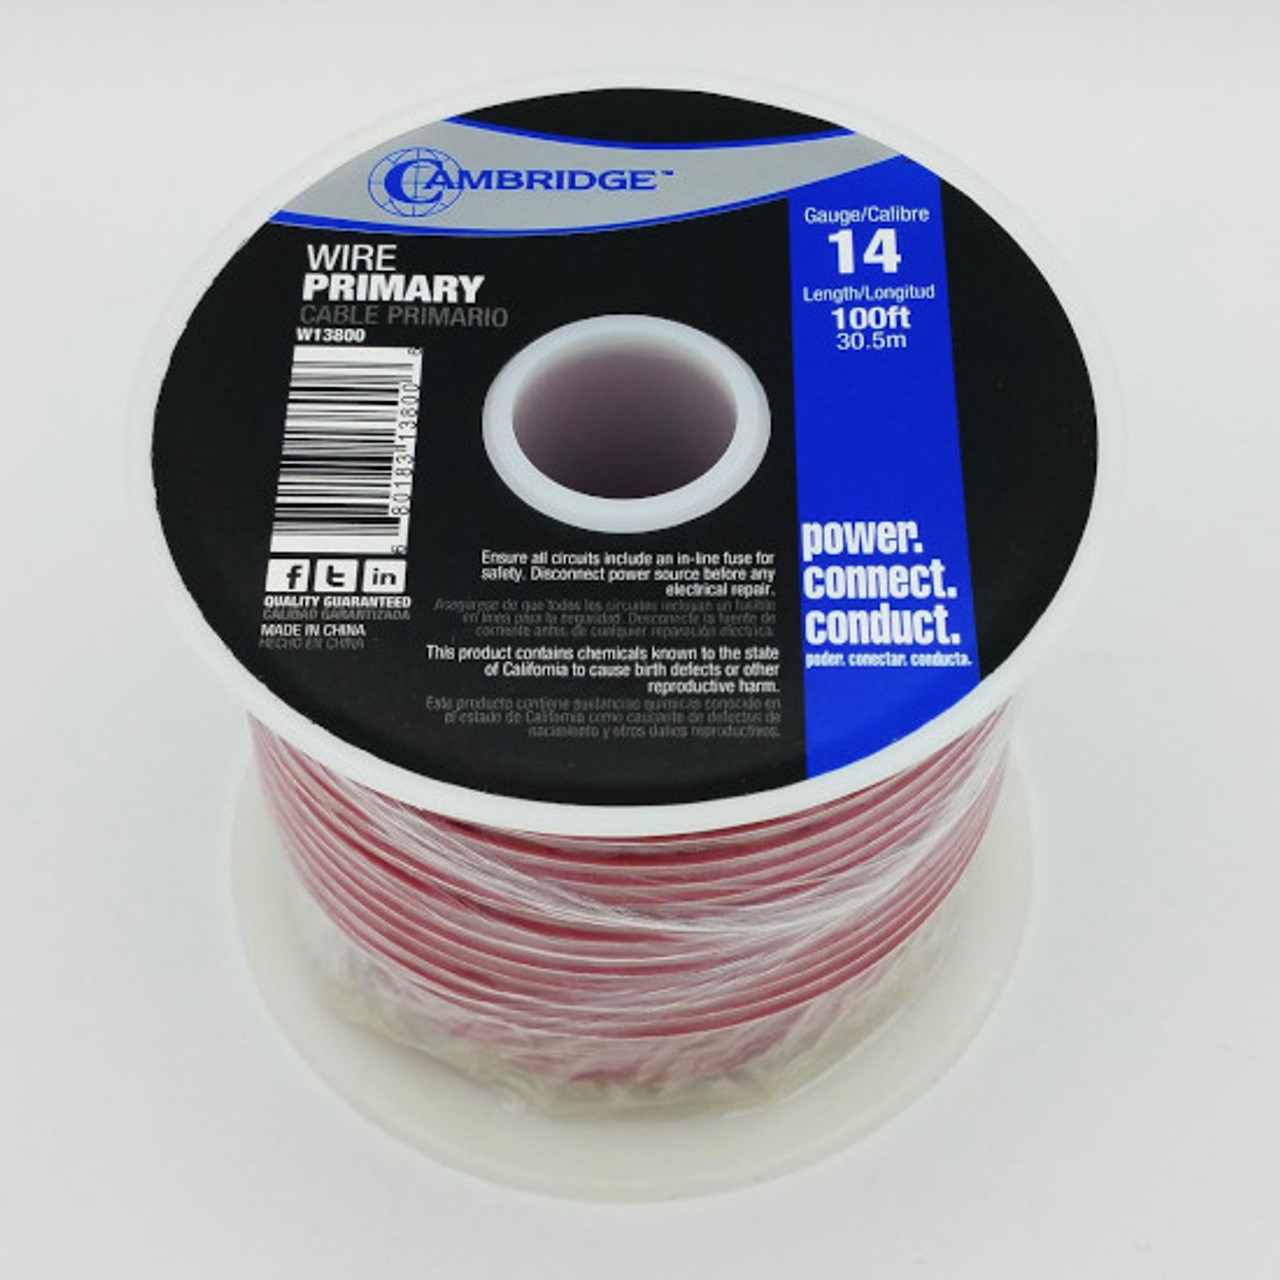 Primary Wire Spool 2